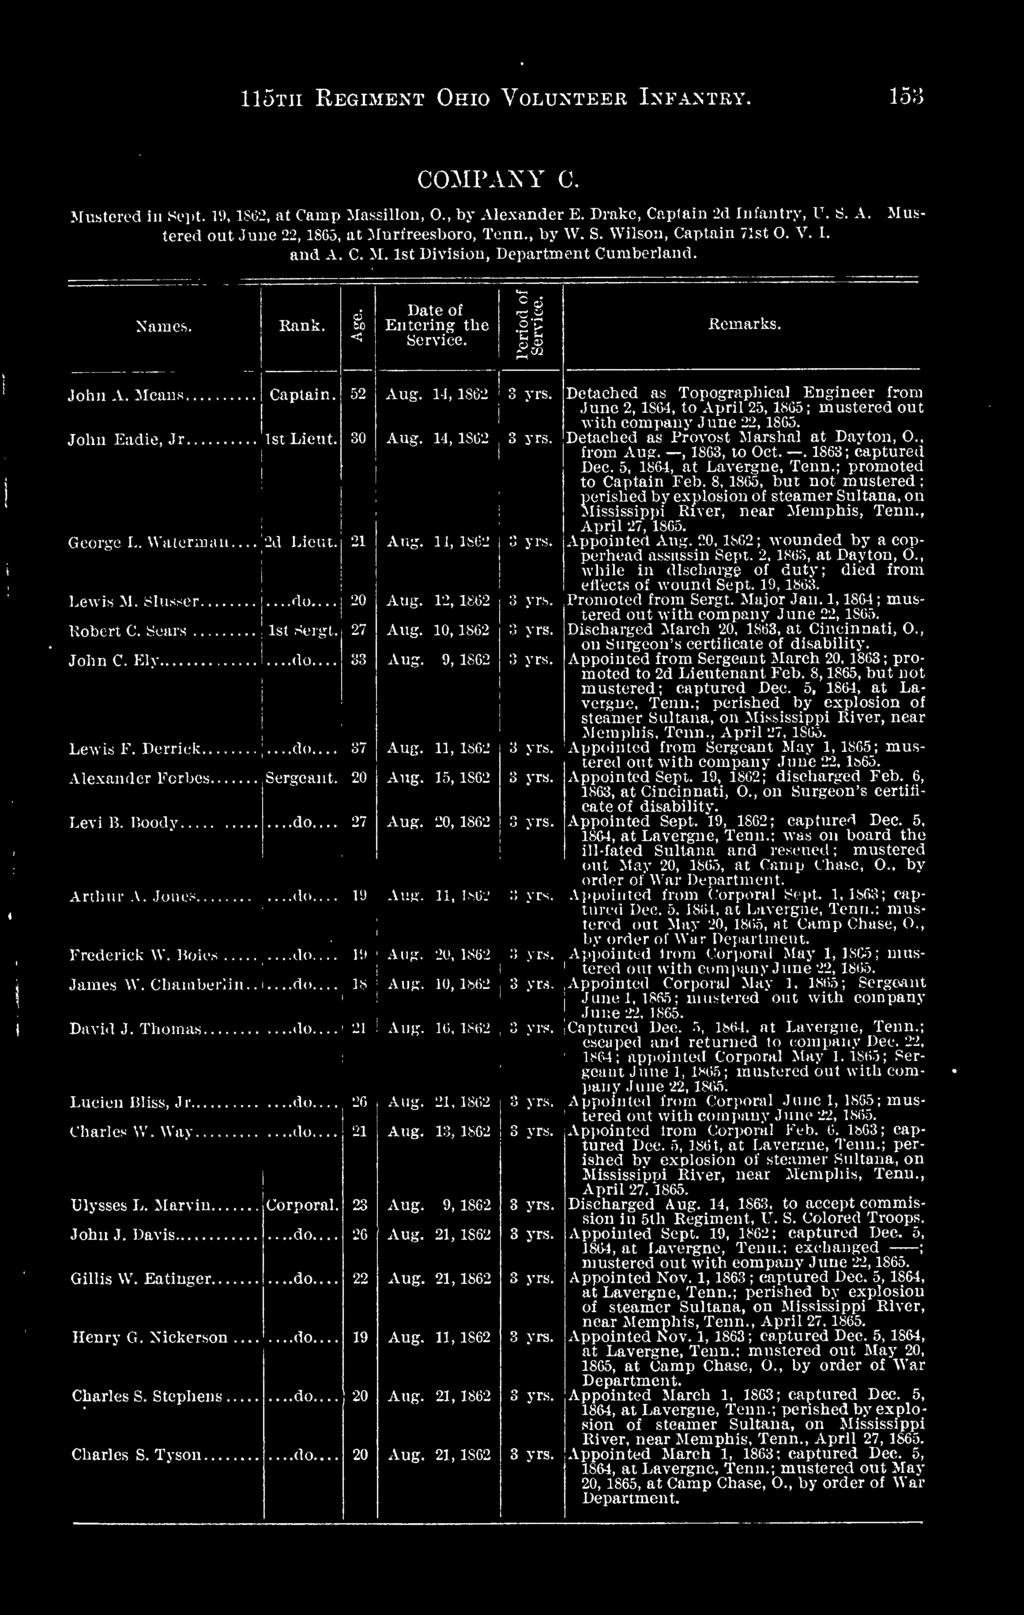 21, 1862 yrs. yrs. yrs yrs. yrs. 3 yrs. 3 yrs. yrs.., 1864, at Lavergne, Tenn.: mis tured Dec. 5, tered out May 20, 1865, flt Camp Chase, O., by order of War Department.